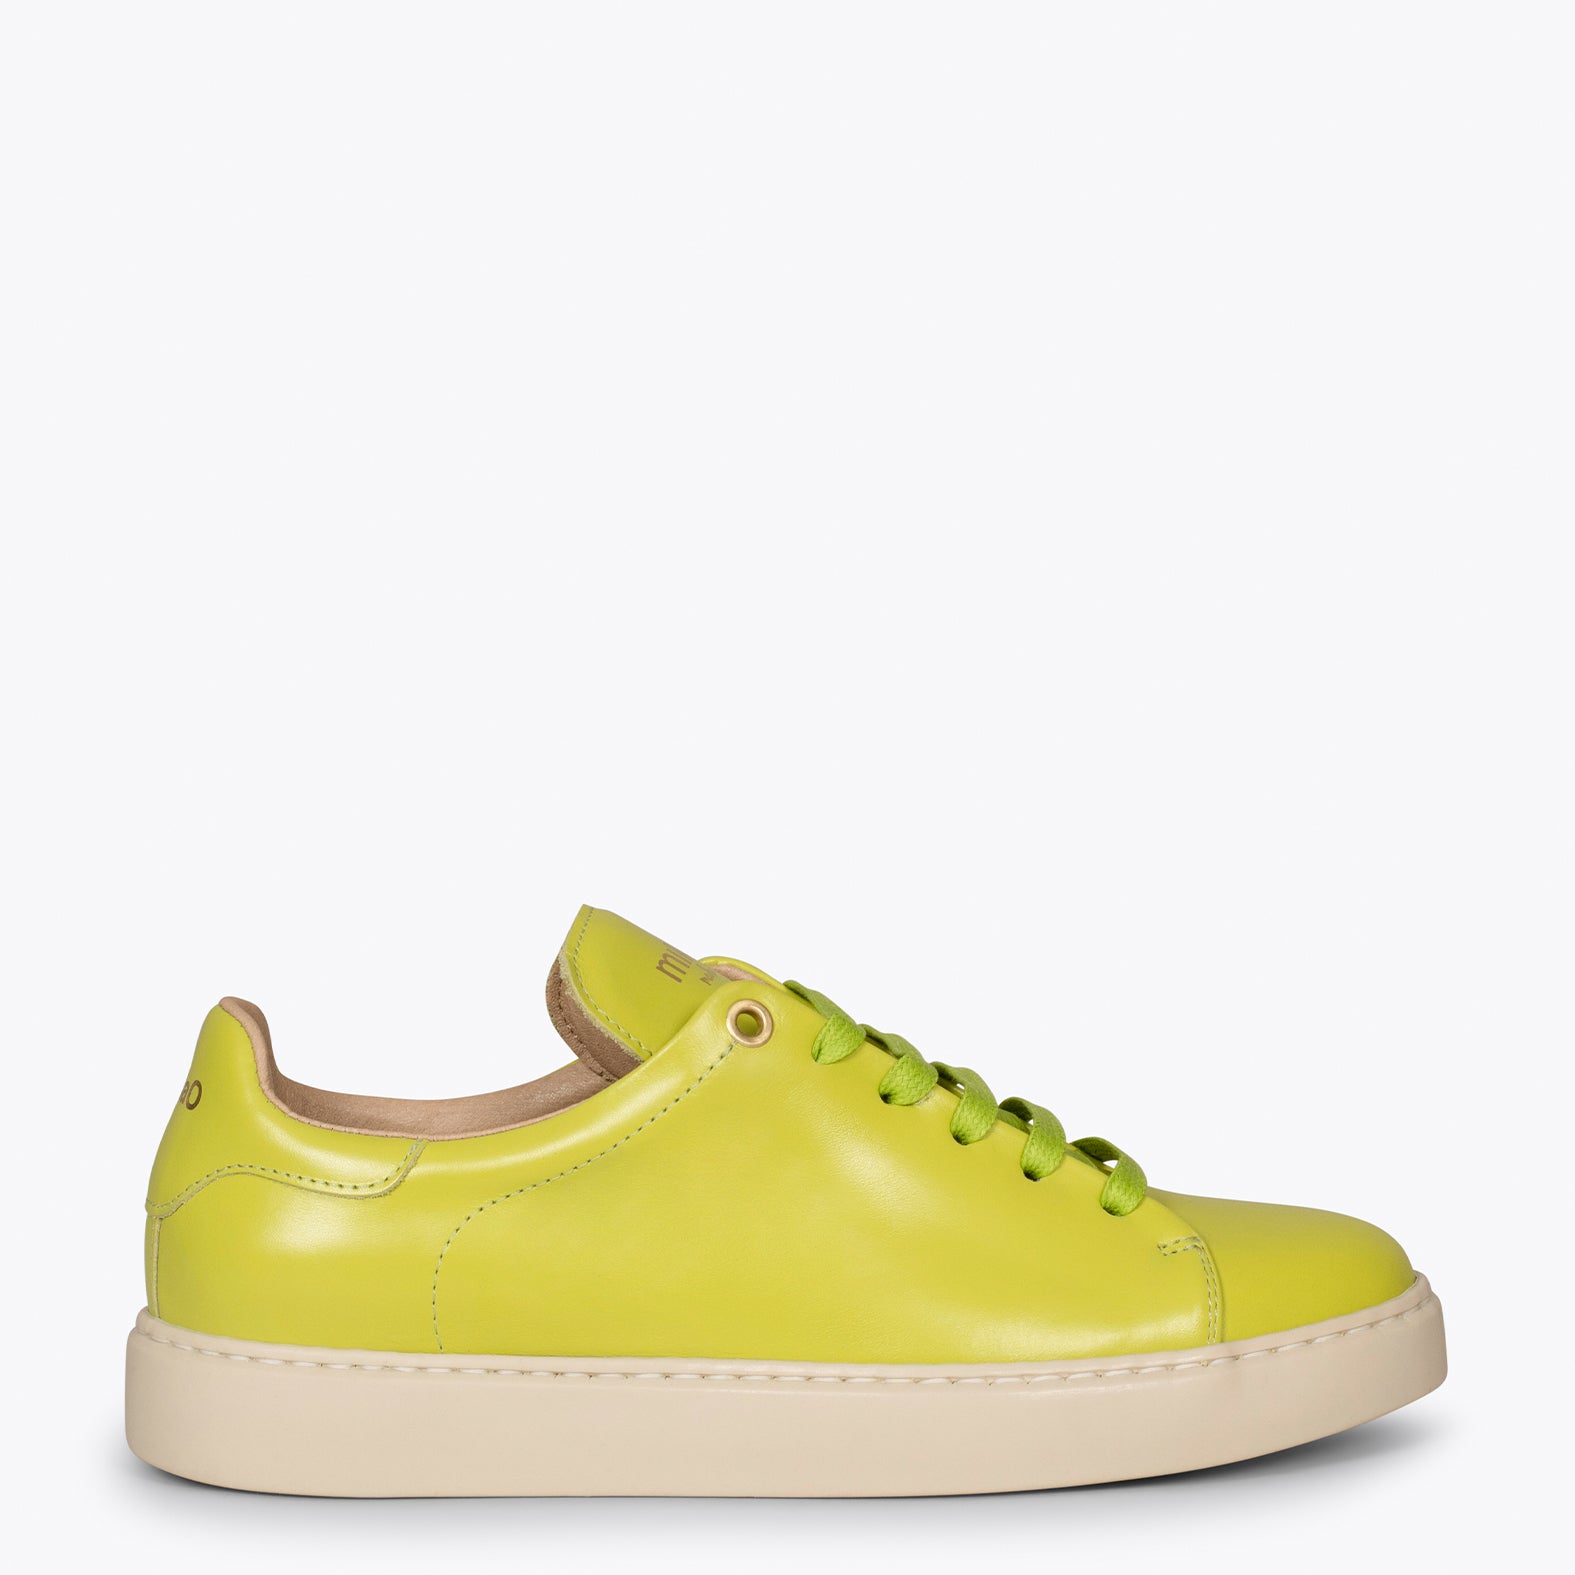 SKATE – YELLOW casual leather sneaker